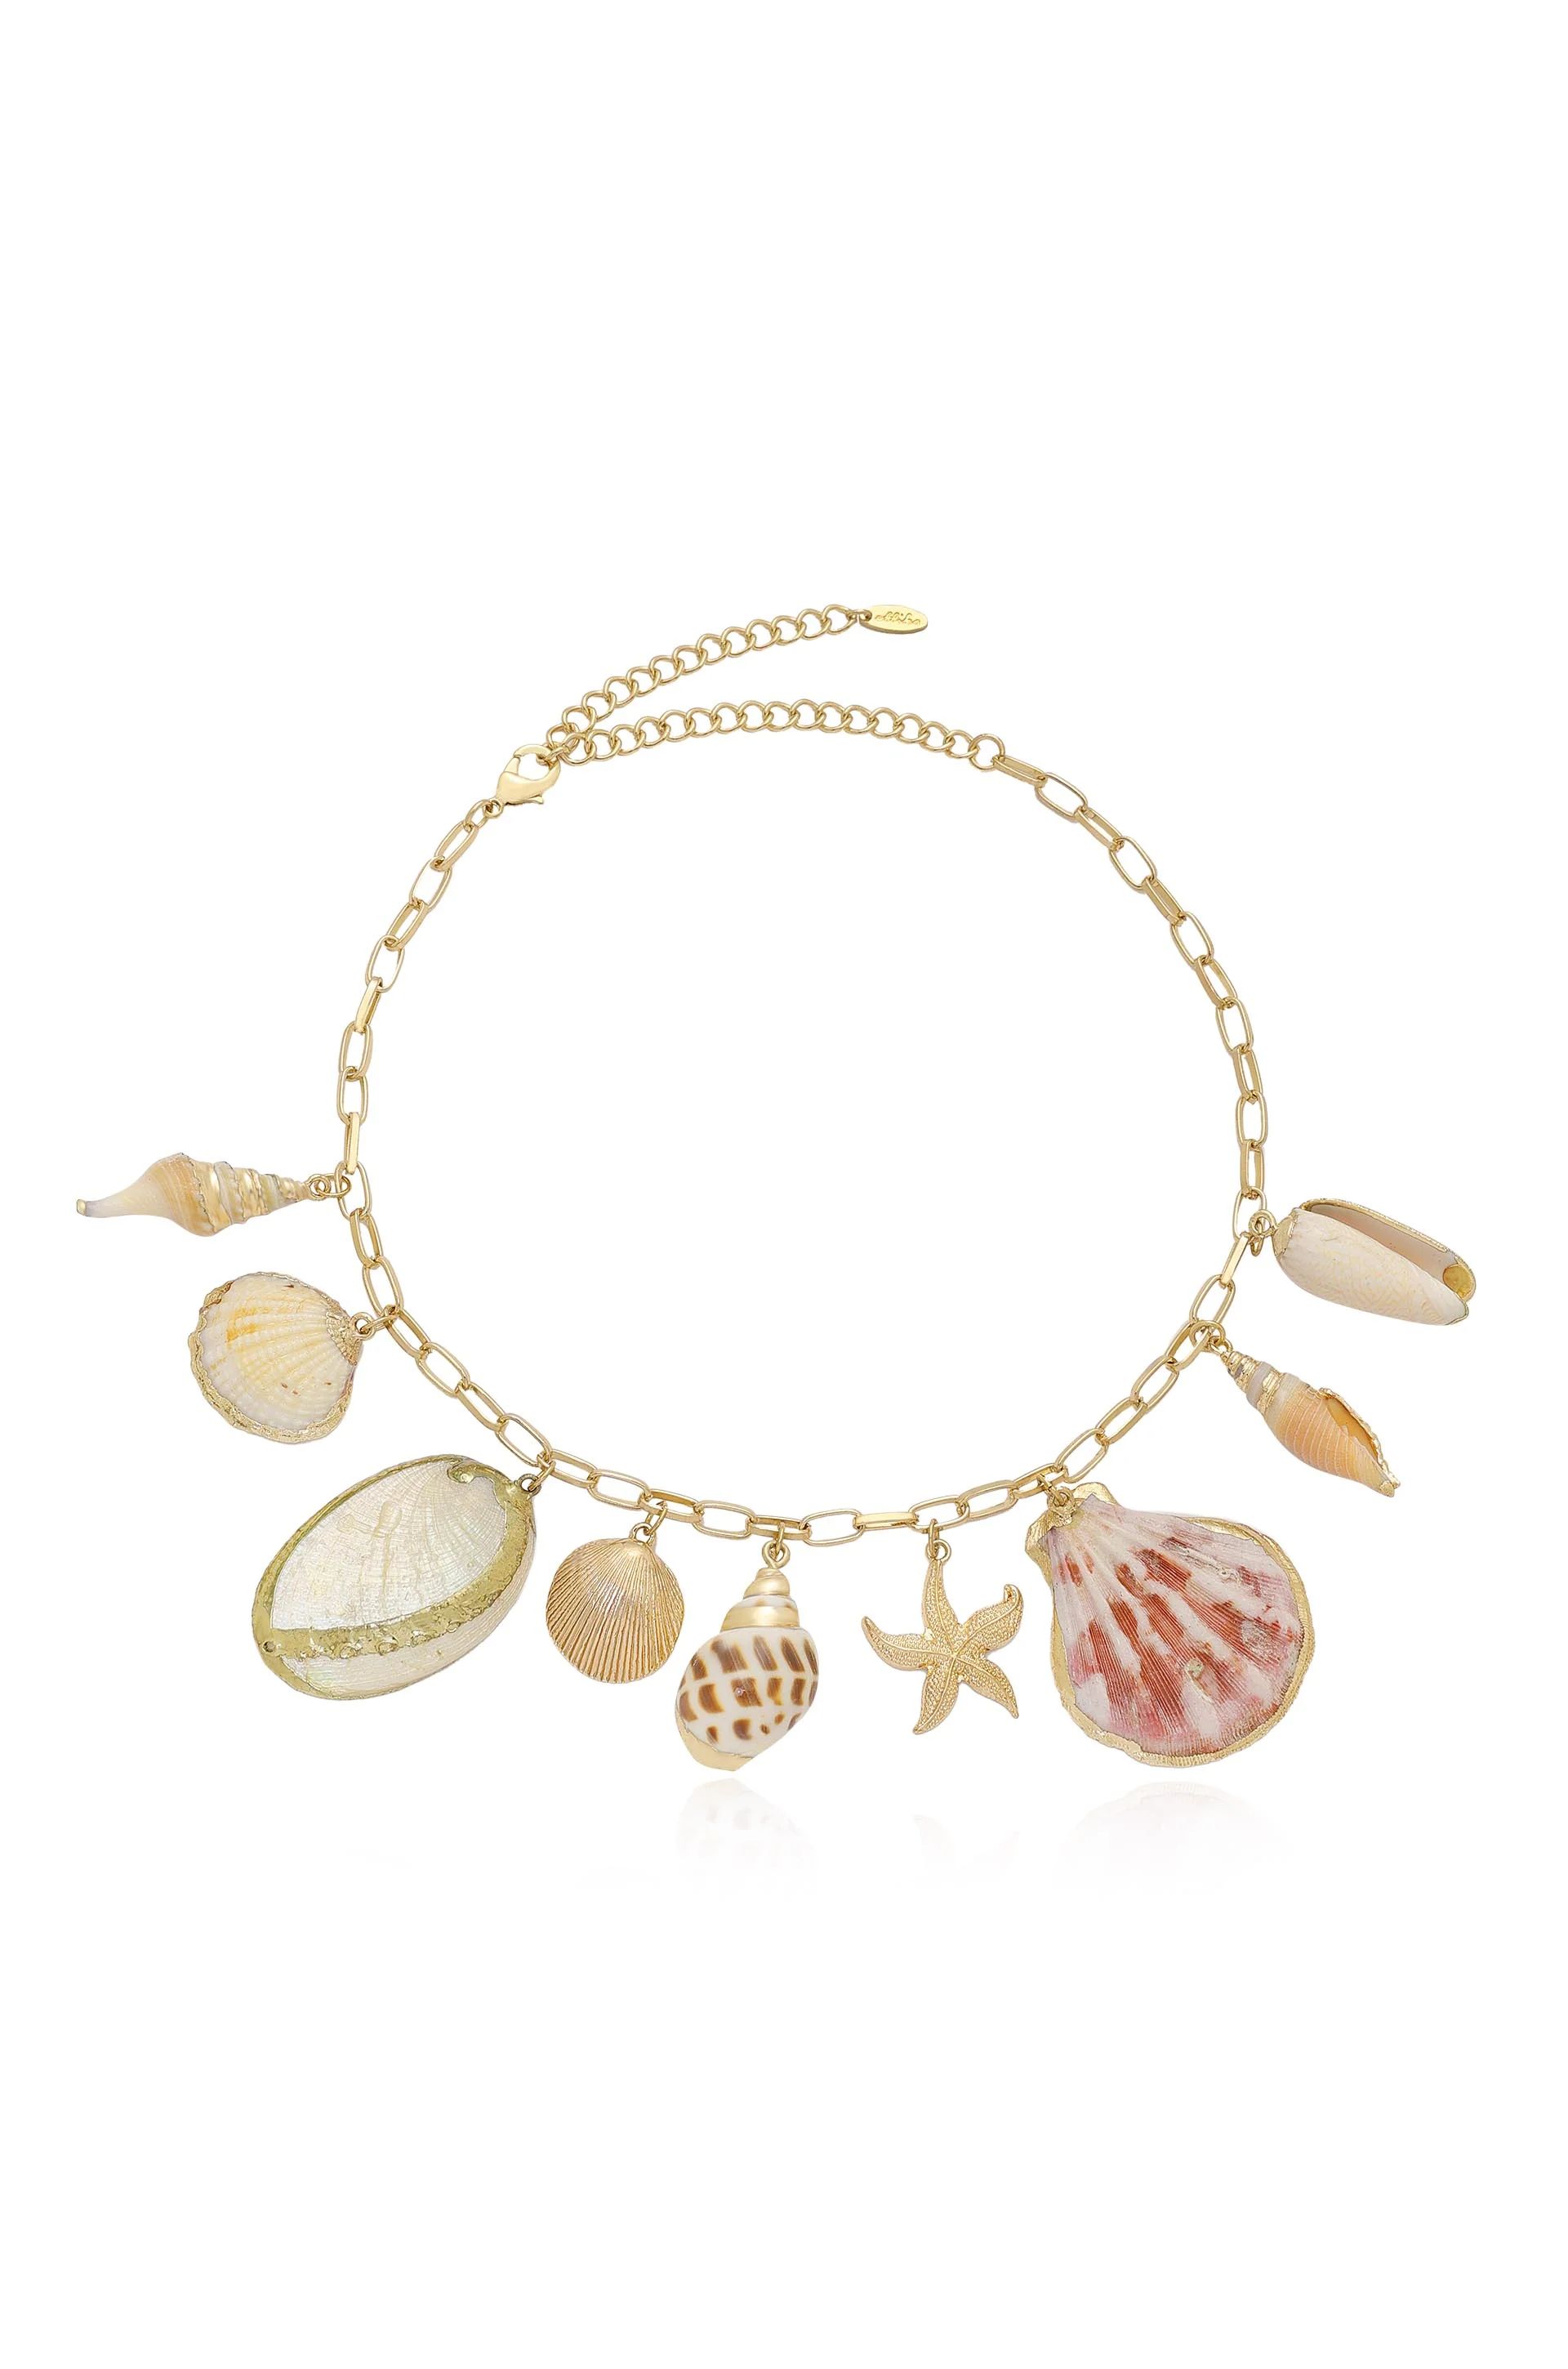 Private Island 18k Gold Plated Assorted Shell Necklace | Ettika